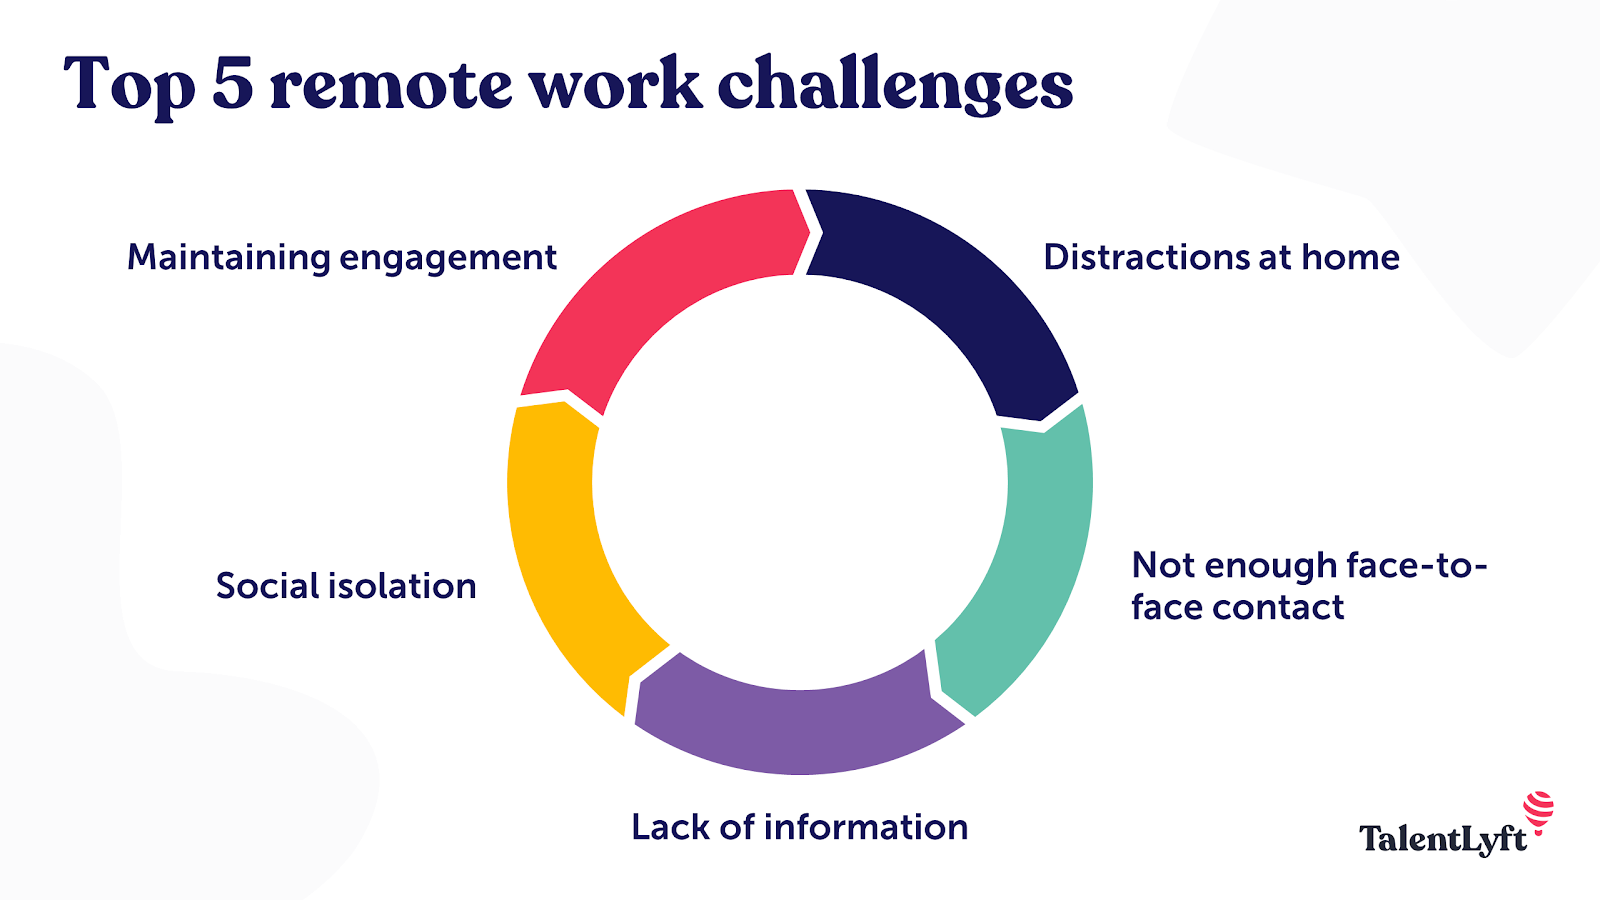 Remote work challenges for employees